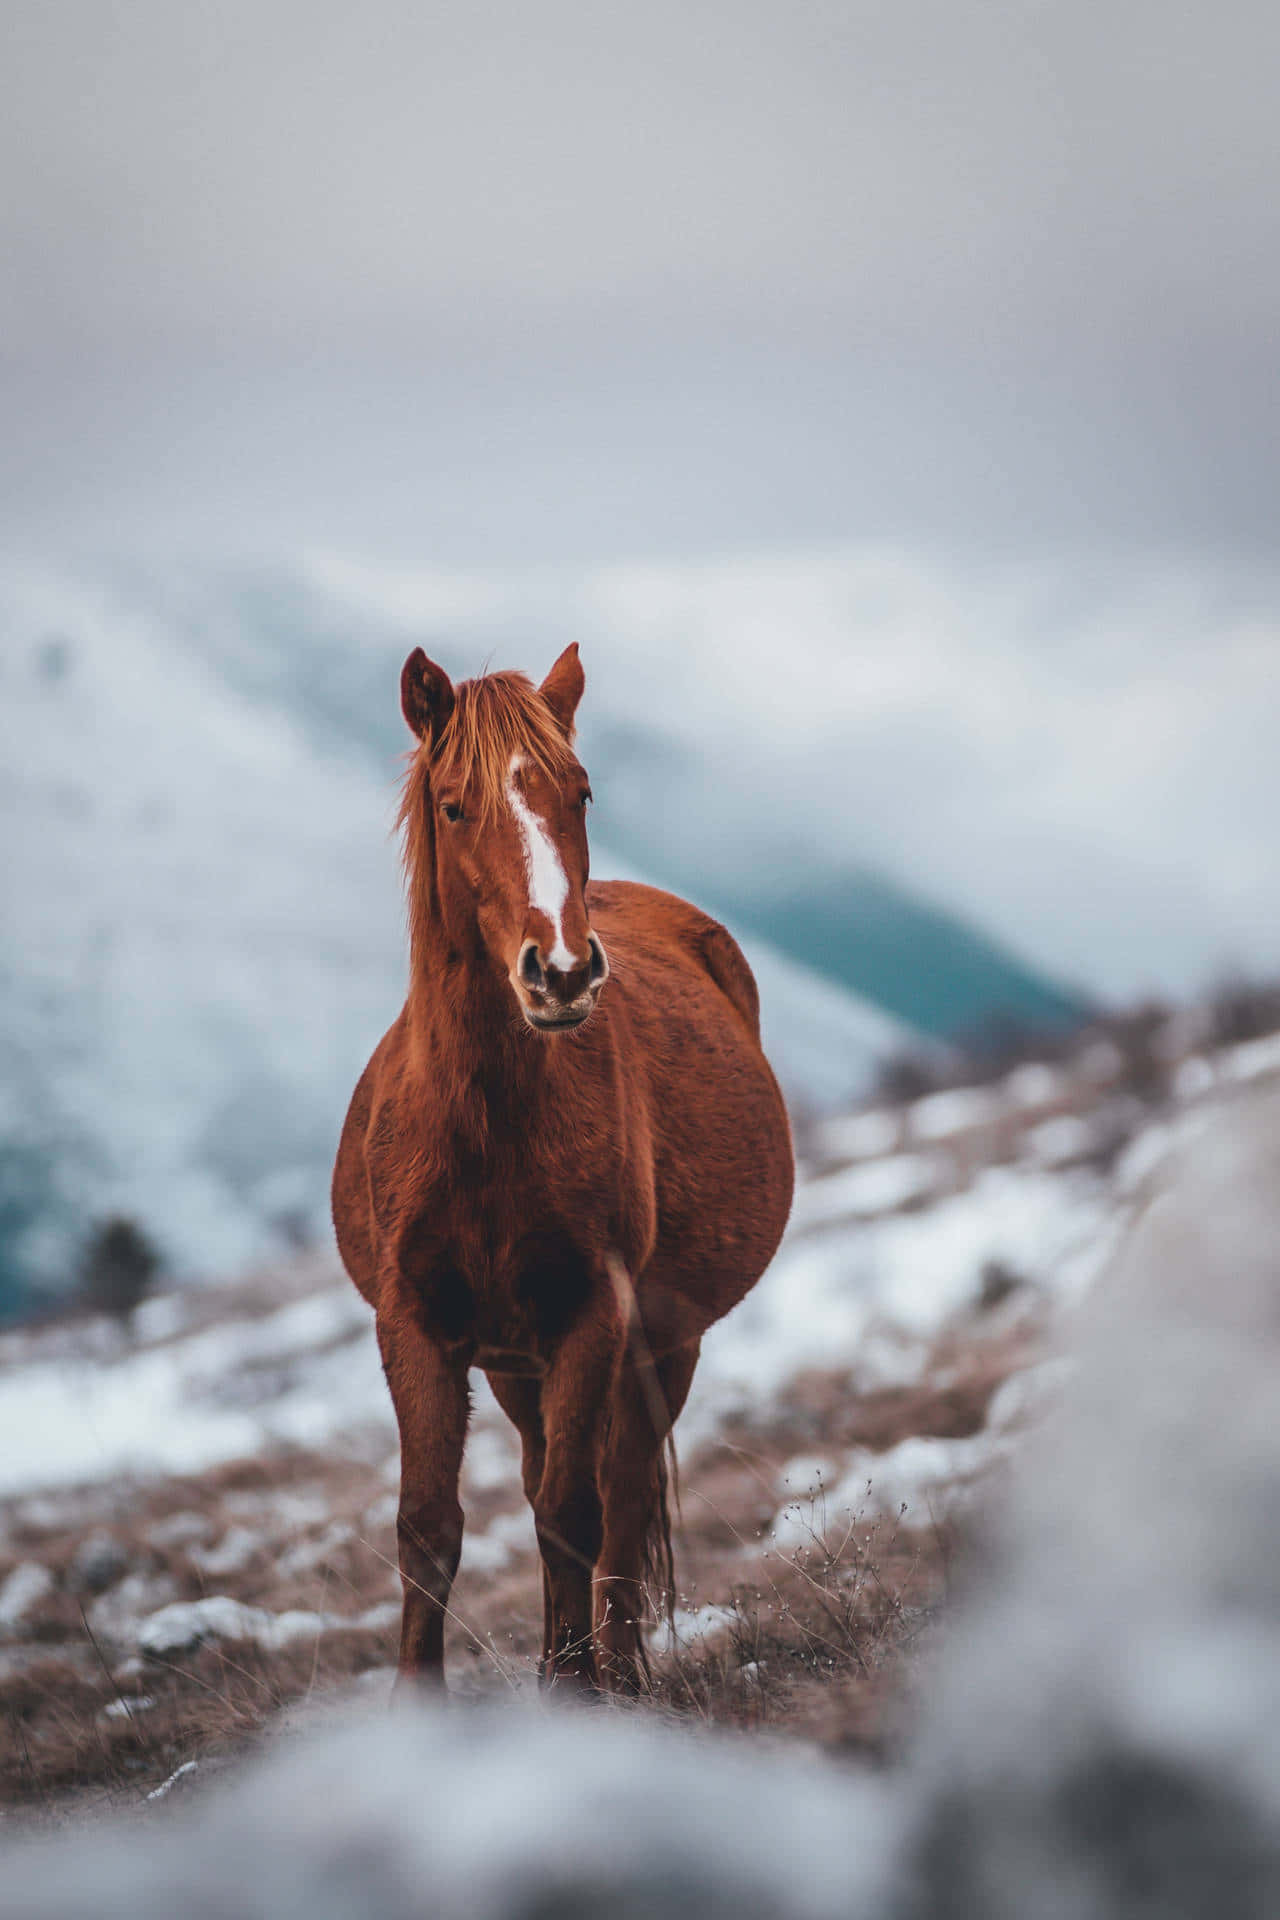 Capture the Beauty of the Wild with this Stunning Horse Iphone 5 Wallpaper Wallpaper